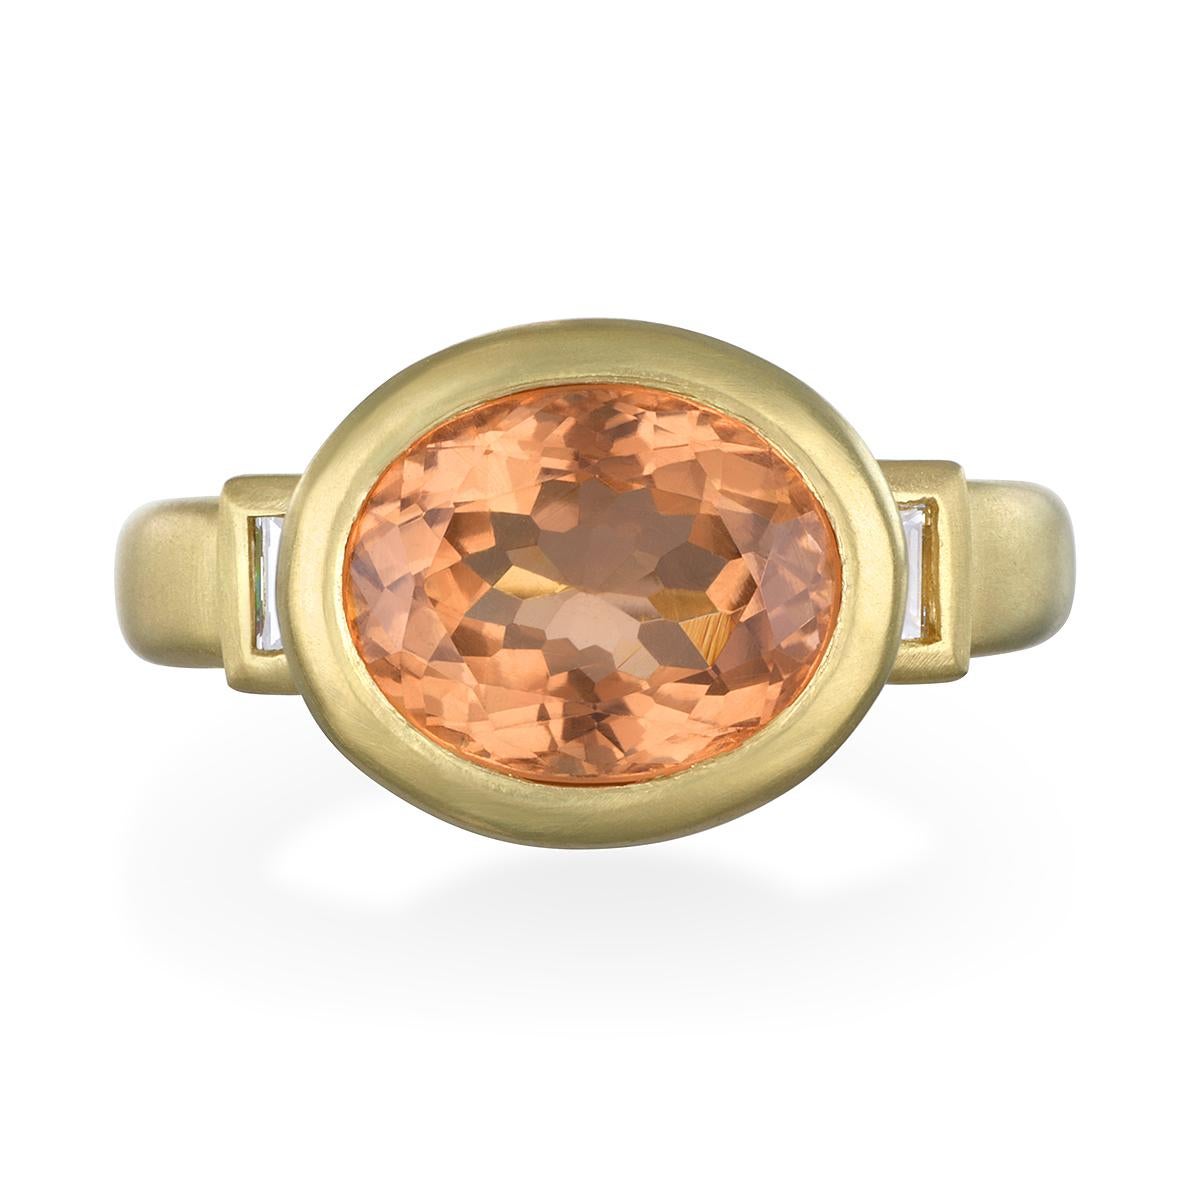 An updated version of the classic three-stone ring. Beautifully handcrafted in 18k gold, a fancy colored 